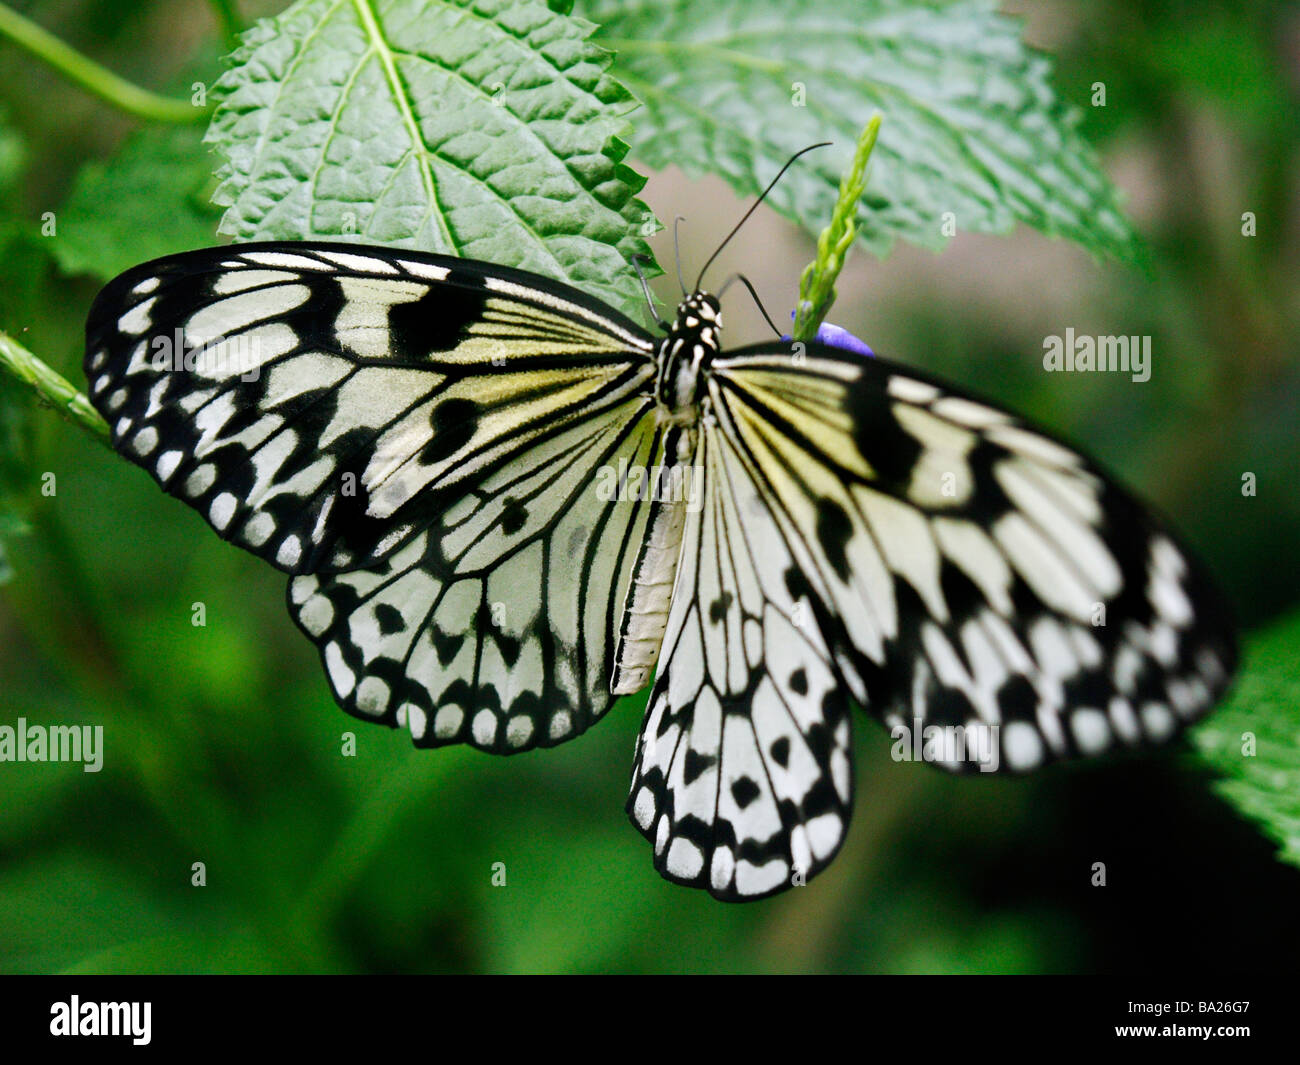 White tree nymph Idea leuconoe or paper kite or rice paper tropical butterfly feeding closeup Stock Photo